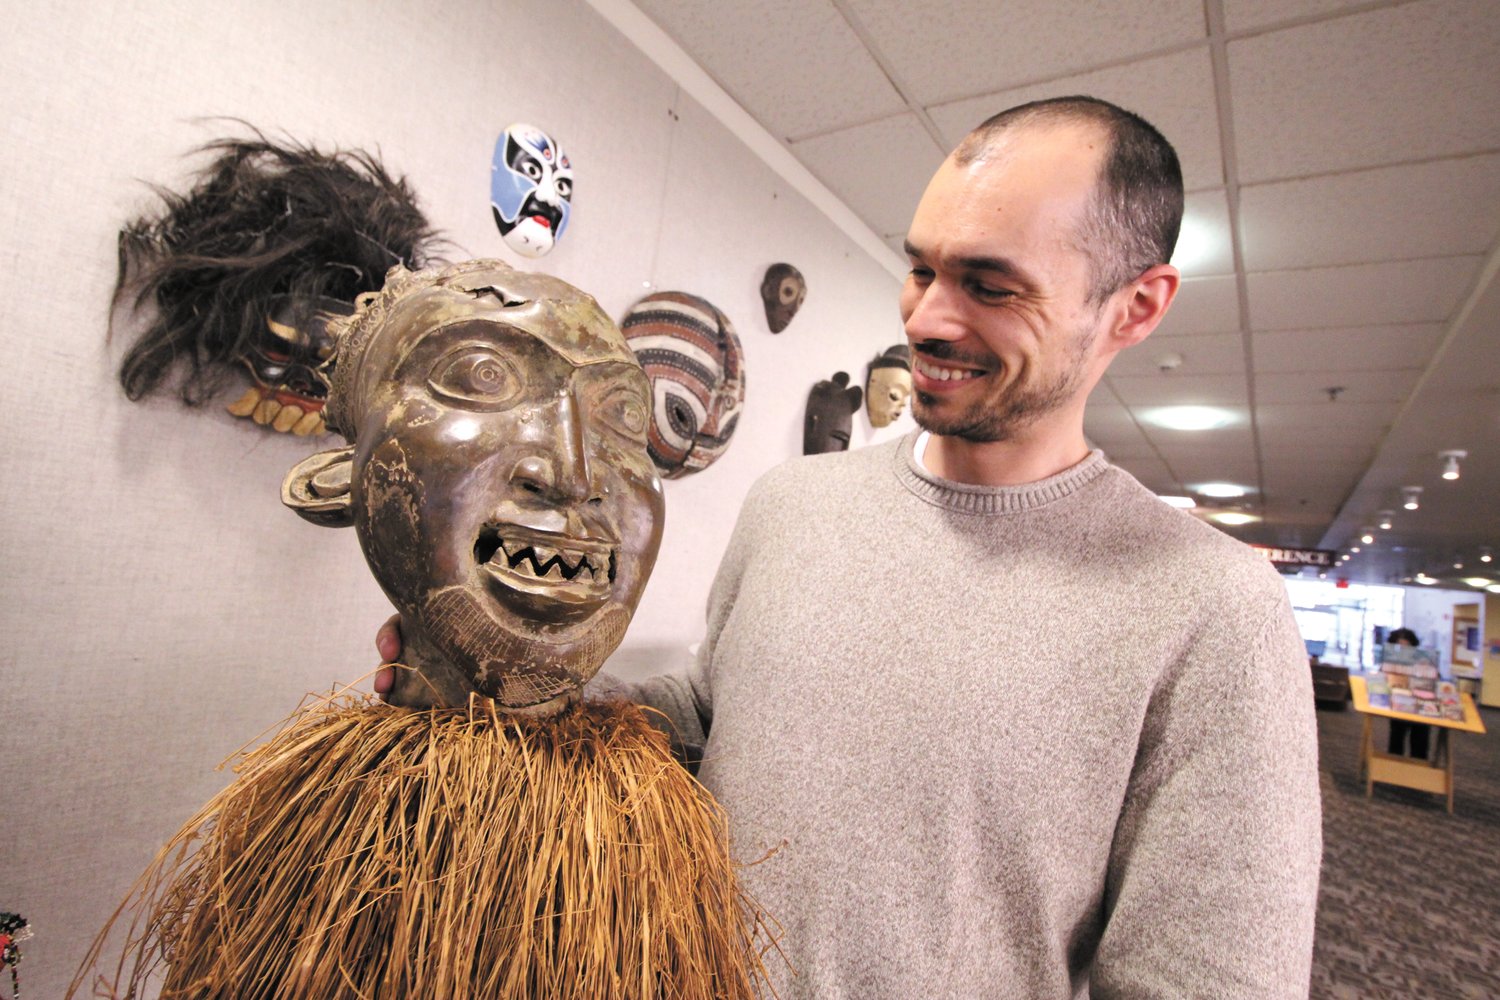 FACE TO FACE: Justin Bibee with a Bamum mask from Cameroon, specifically the Cameroon Grasslands, made of bronze with raffia palms. This mask is part of a family of masks that perform together. It represents the male human face and symbolizes a clan ancestor. Masks such as these are performed at funeral or memorial celebrations. This mask is worn on the top of the head, while raffia palm conceals the performer’s face, and a mesh veil covers the performer’s body. It is one of many in his collection on display at the Warwick Public Library through May 31.